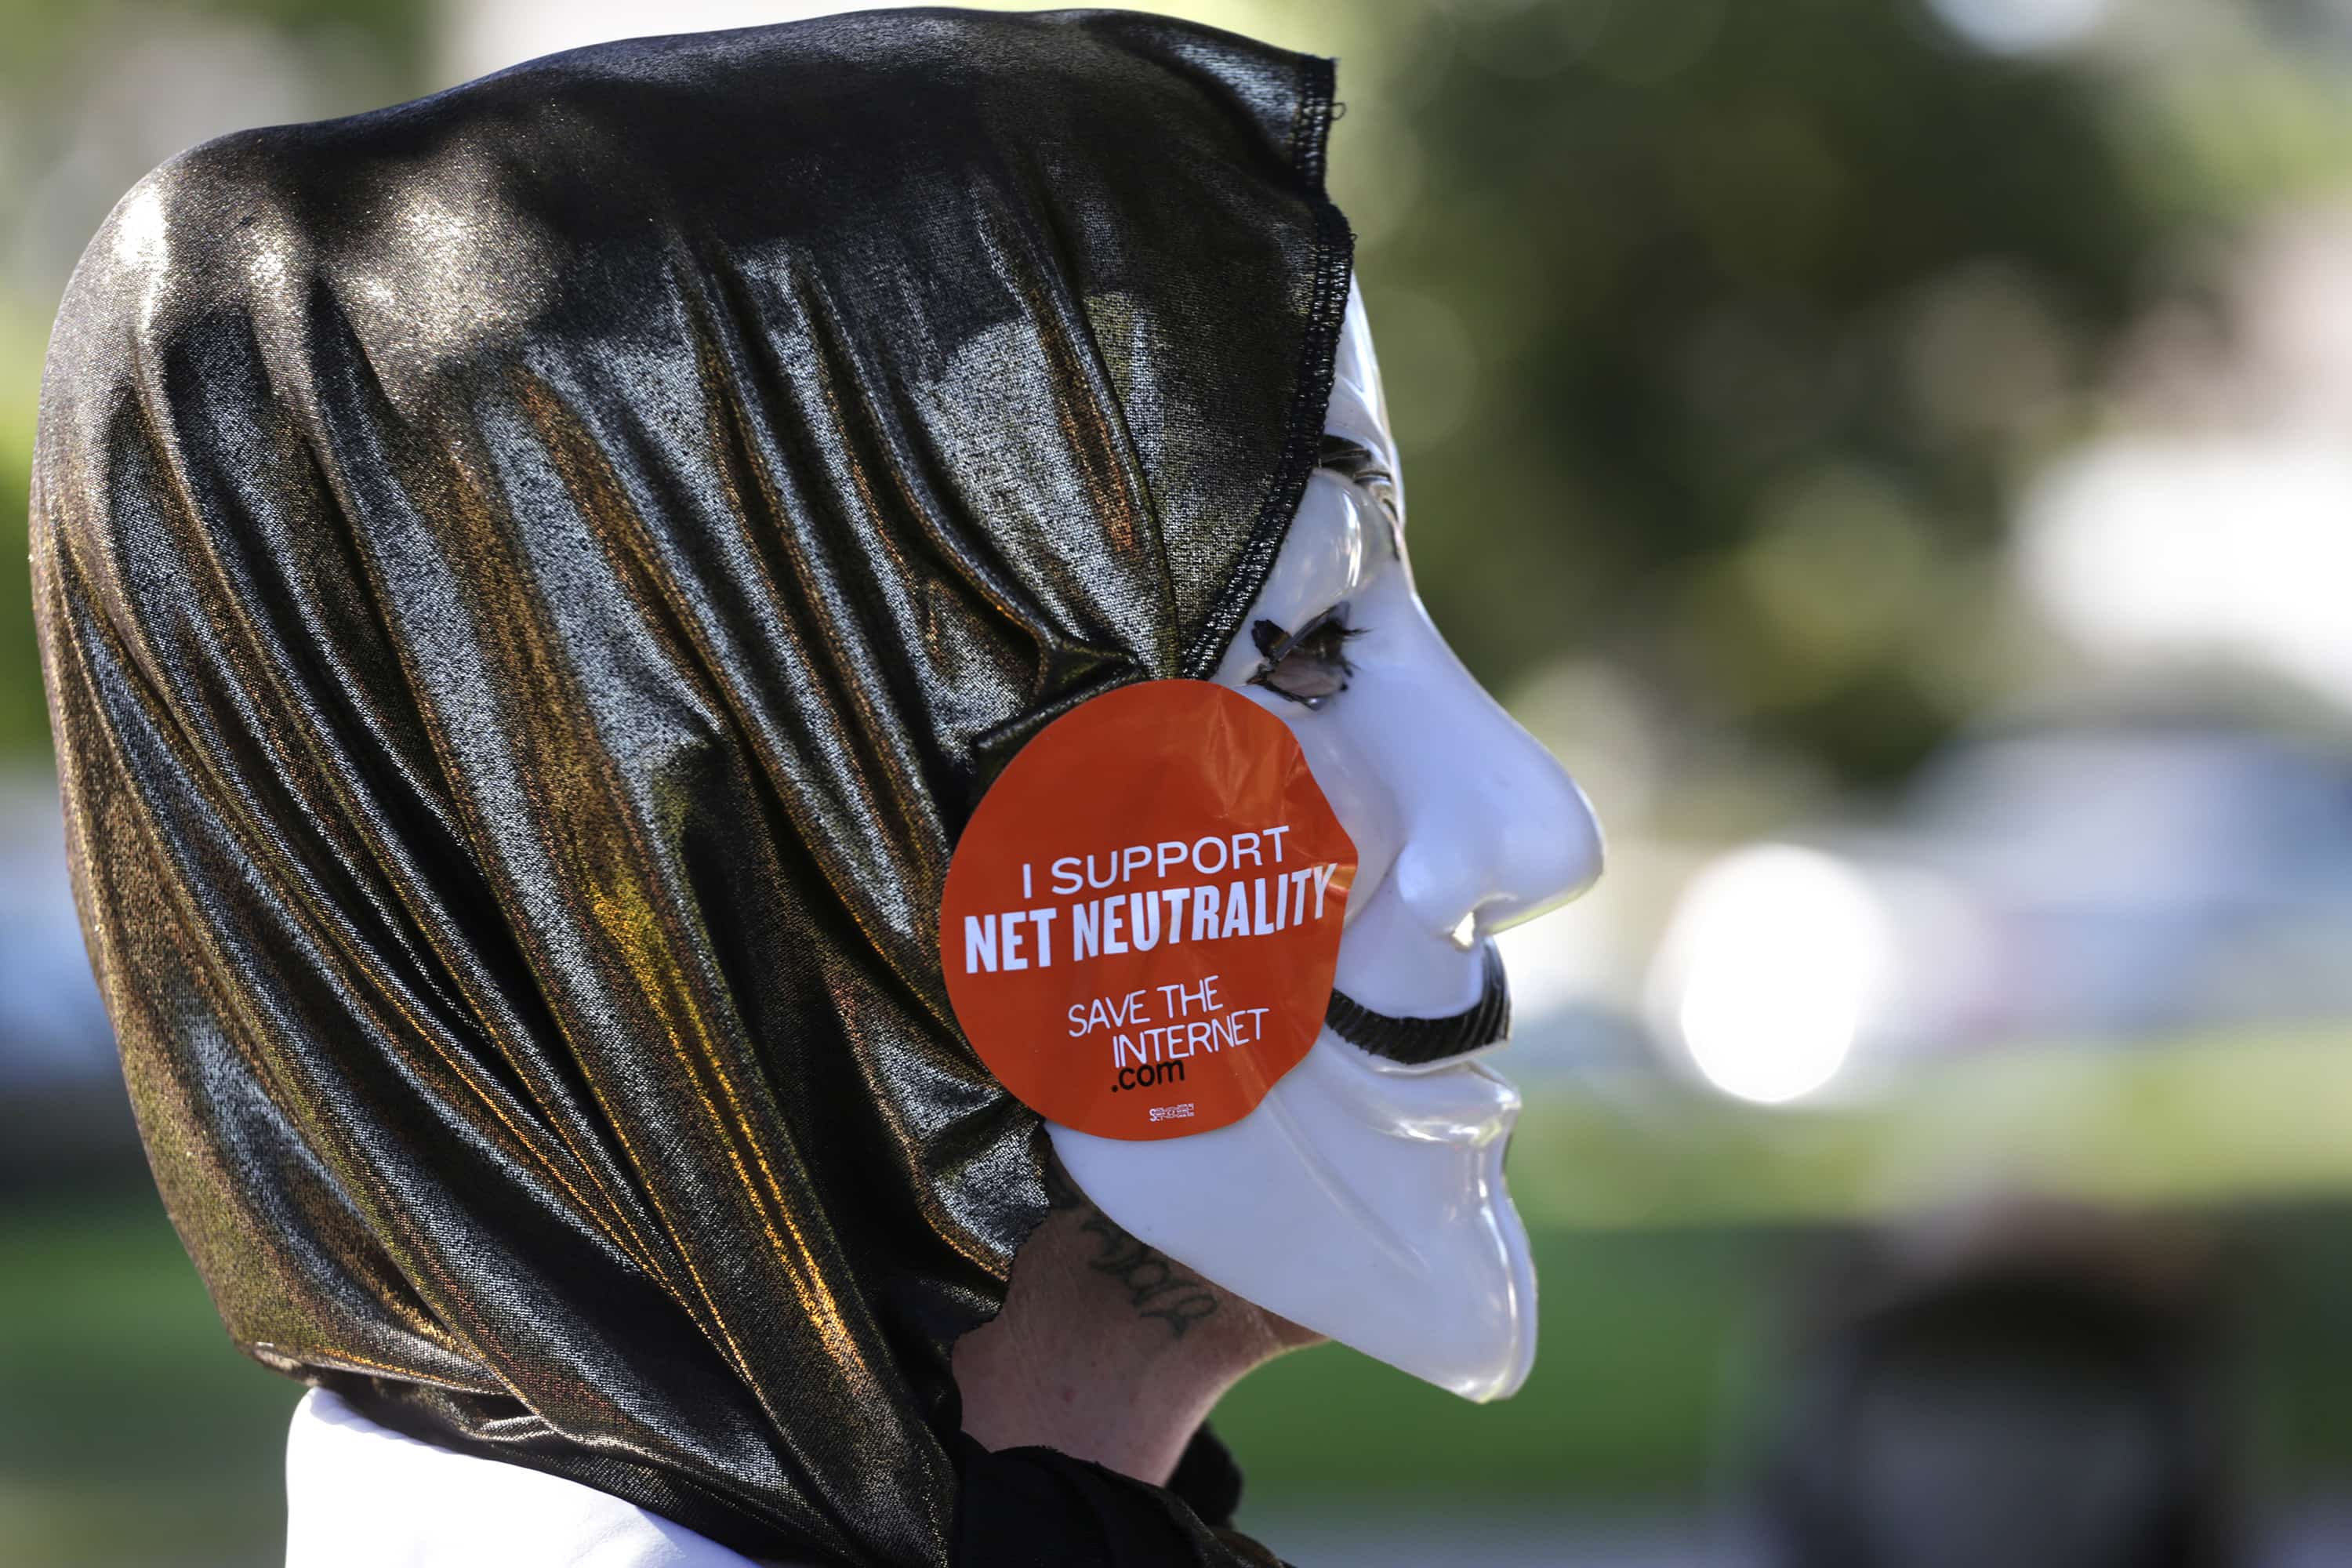 A pro-net neutrality Internet activist attends a rally in the neighborhood where U.S. President Barack Obama attended a fundraiser in Los Angeles, California, 23 July 2014 , REUTERS/Jonathan Alcorn